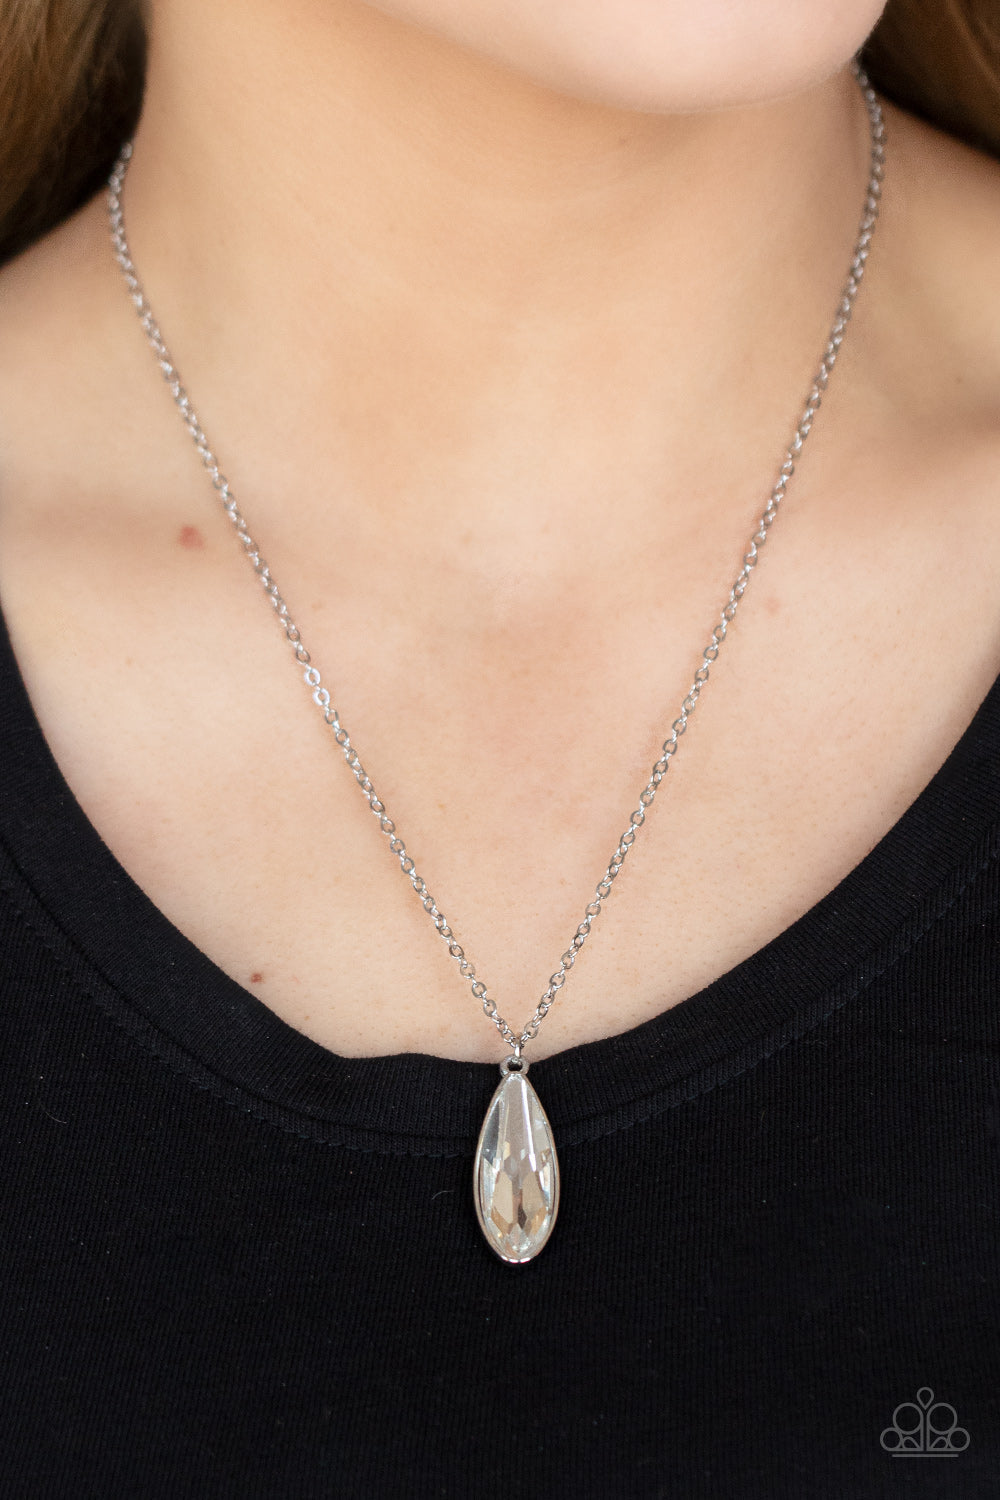 Prismatically Polished - White Gem - Silver Necklace - Encased in a sleek silver fitting, an elongated white teardrop gem swings from the bottom of a classic silver chain below the collar for a timeless elegance. Features an adjustable clasp closure.